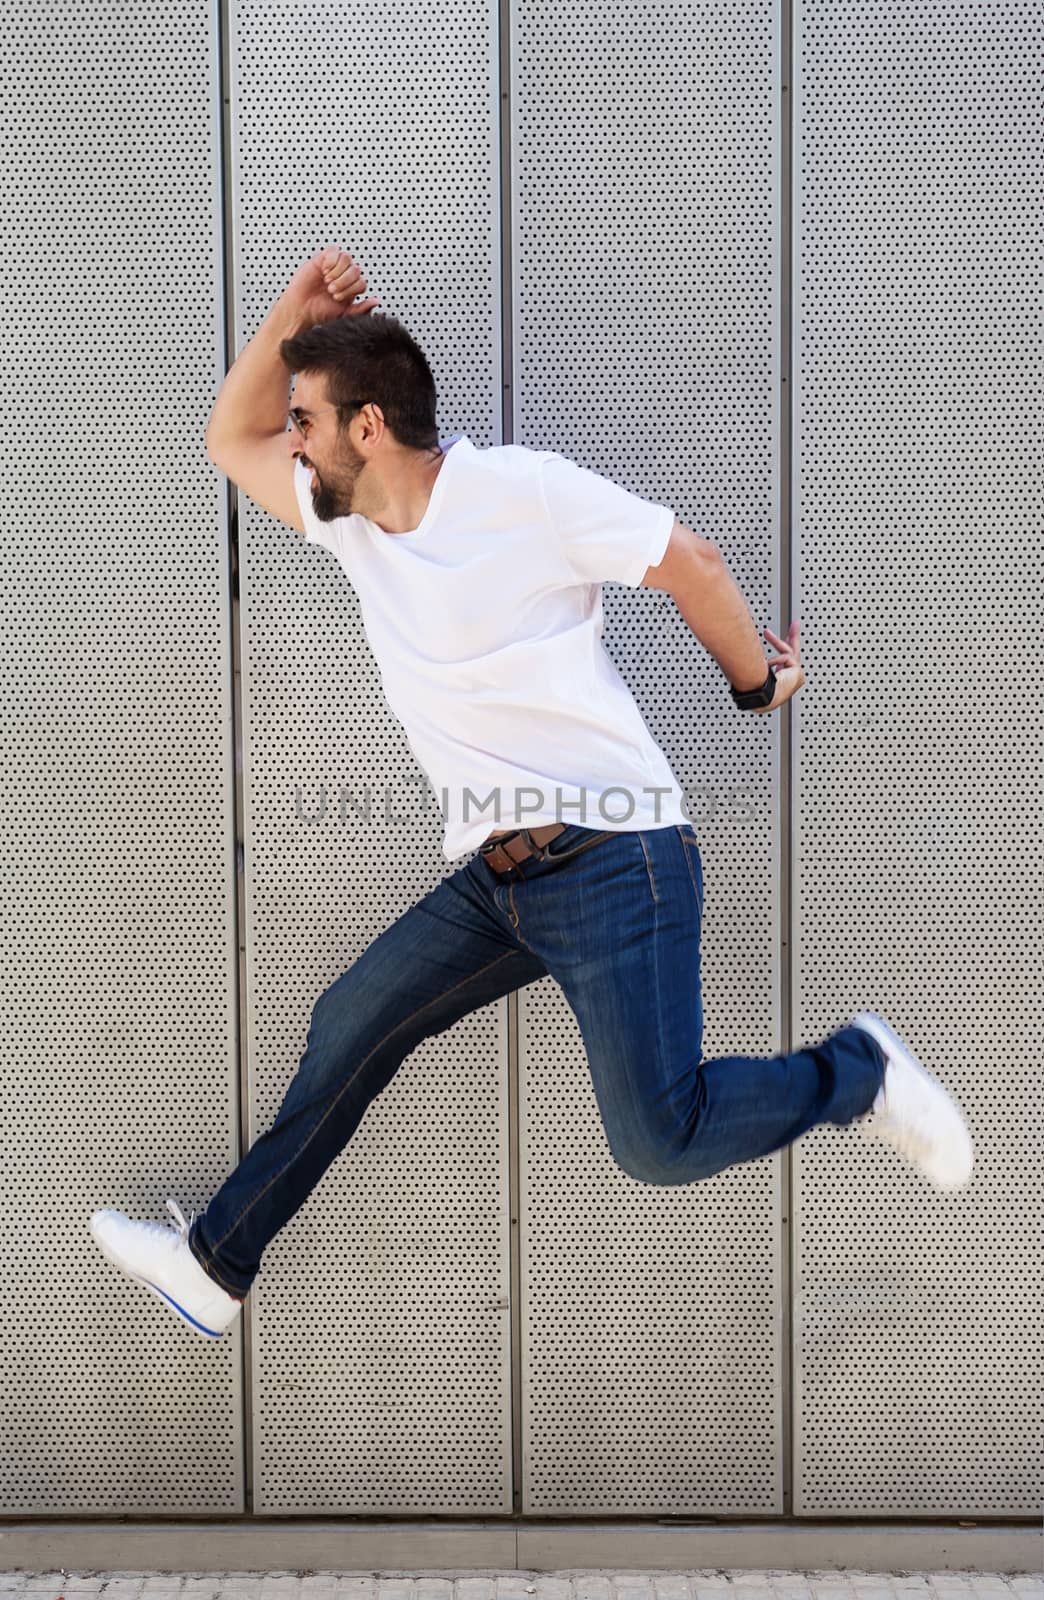 Bearded man with sunglasses jumping against metallic wall by raferto1973